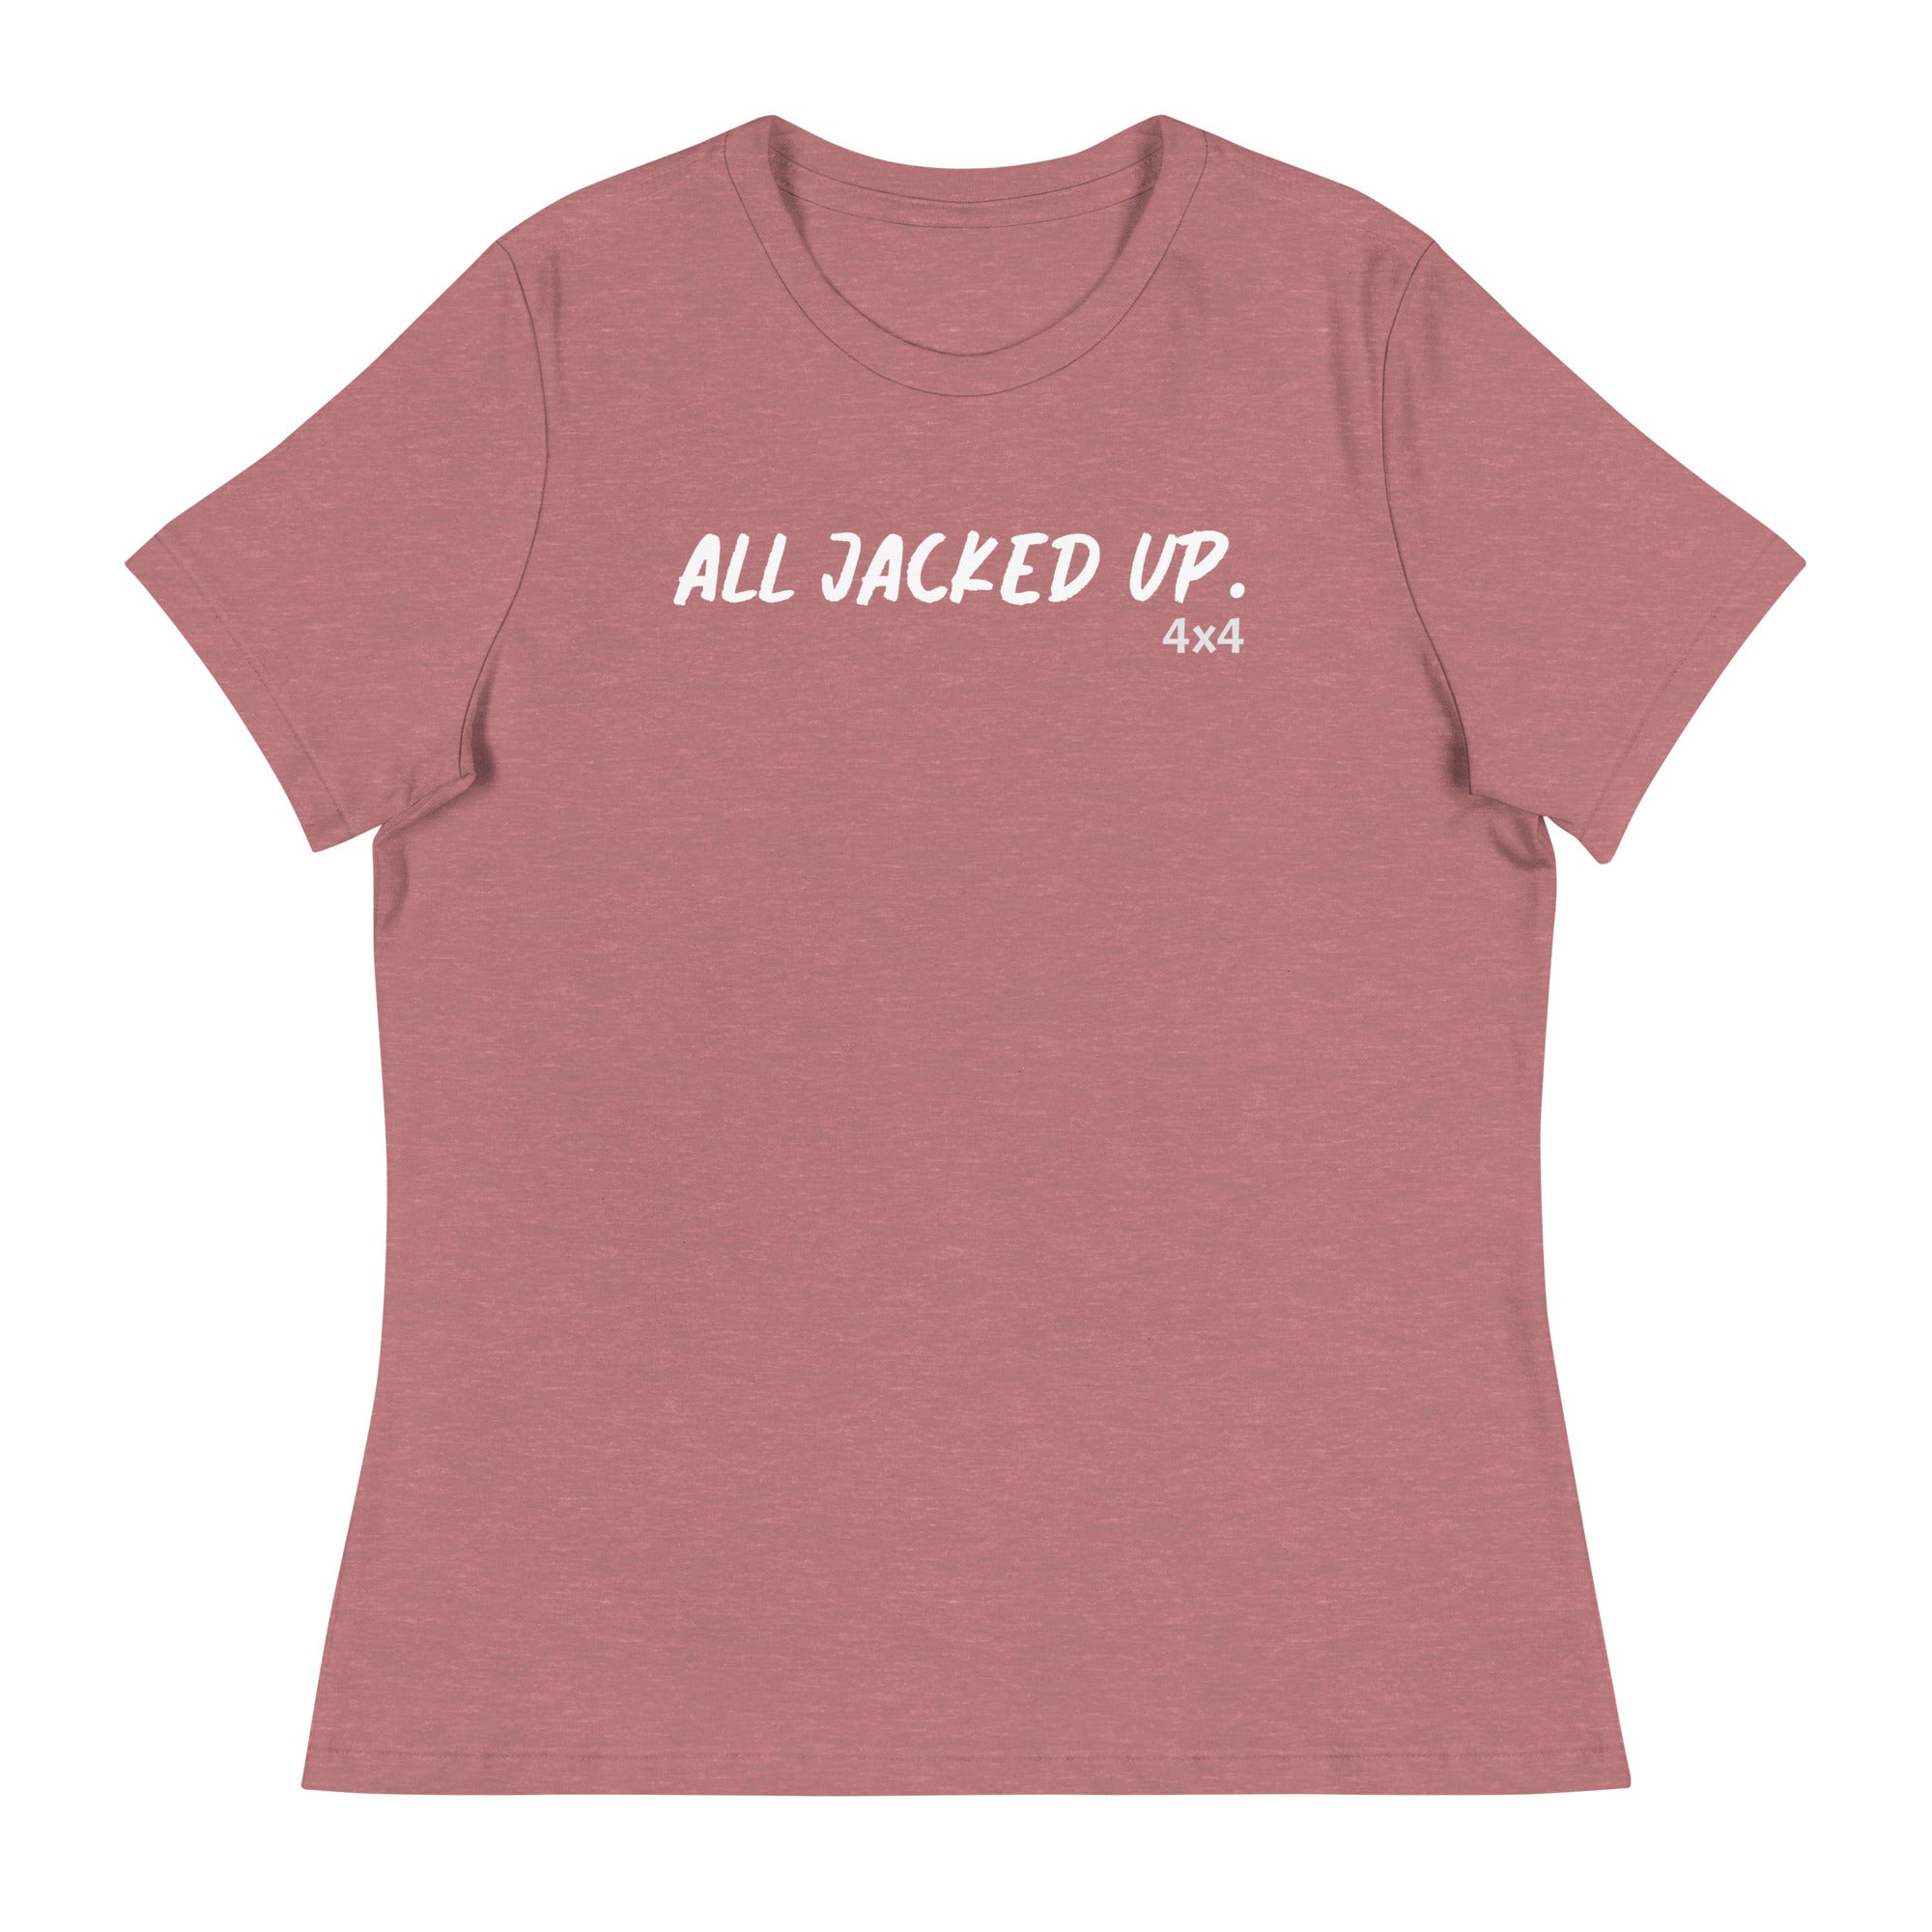 All jacked up-Women's Relaxed T-Shirt